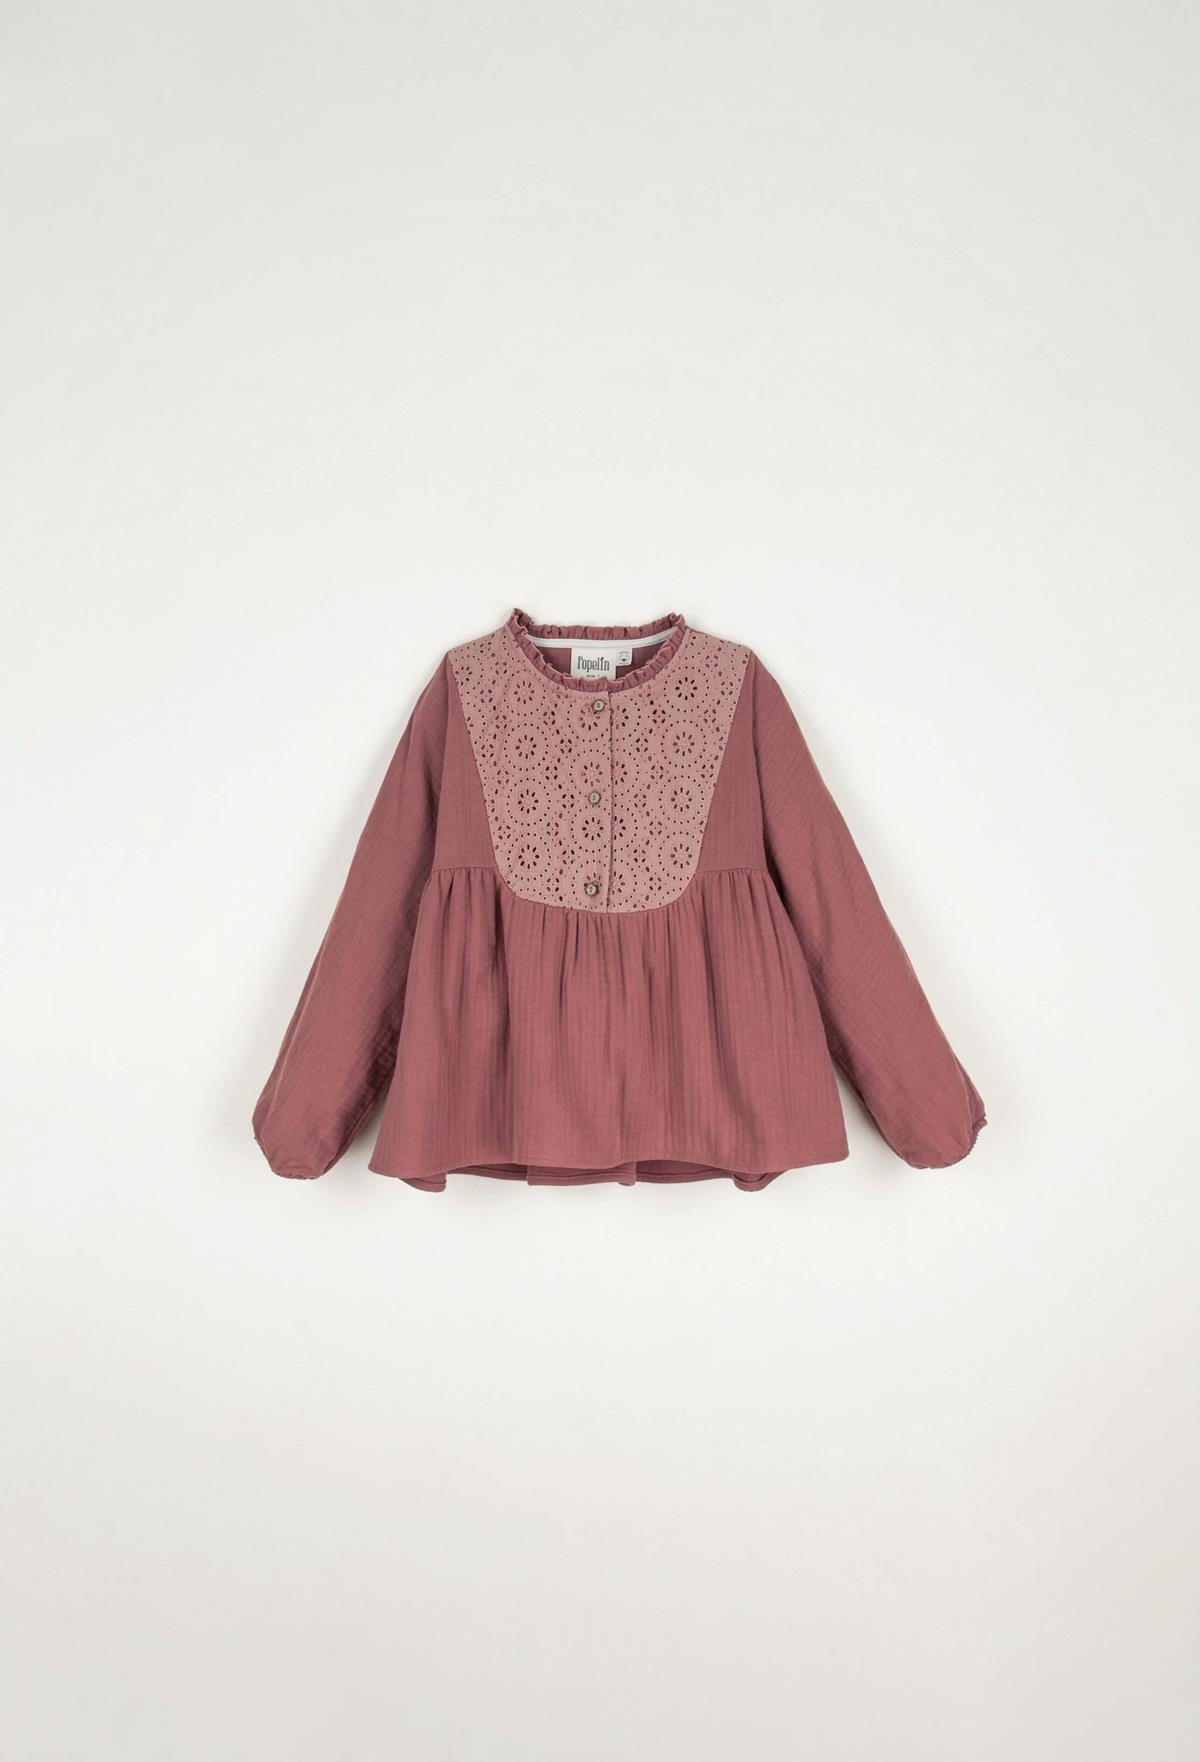 Mod.14.3 Pink blouse with yoke and Swiss embroidery | AW22.23 Mod.14.3 Pink blouse with yoke and Swiss embroidery